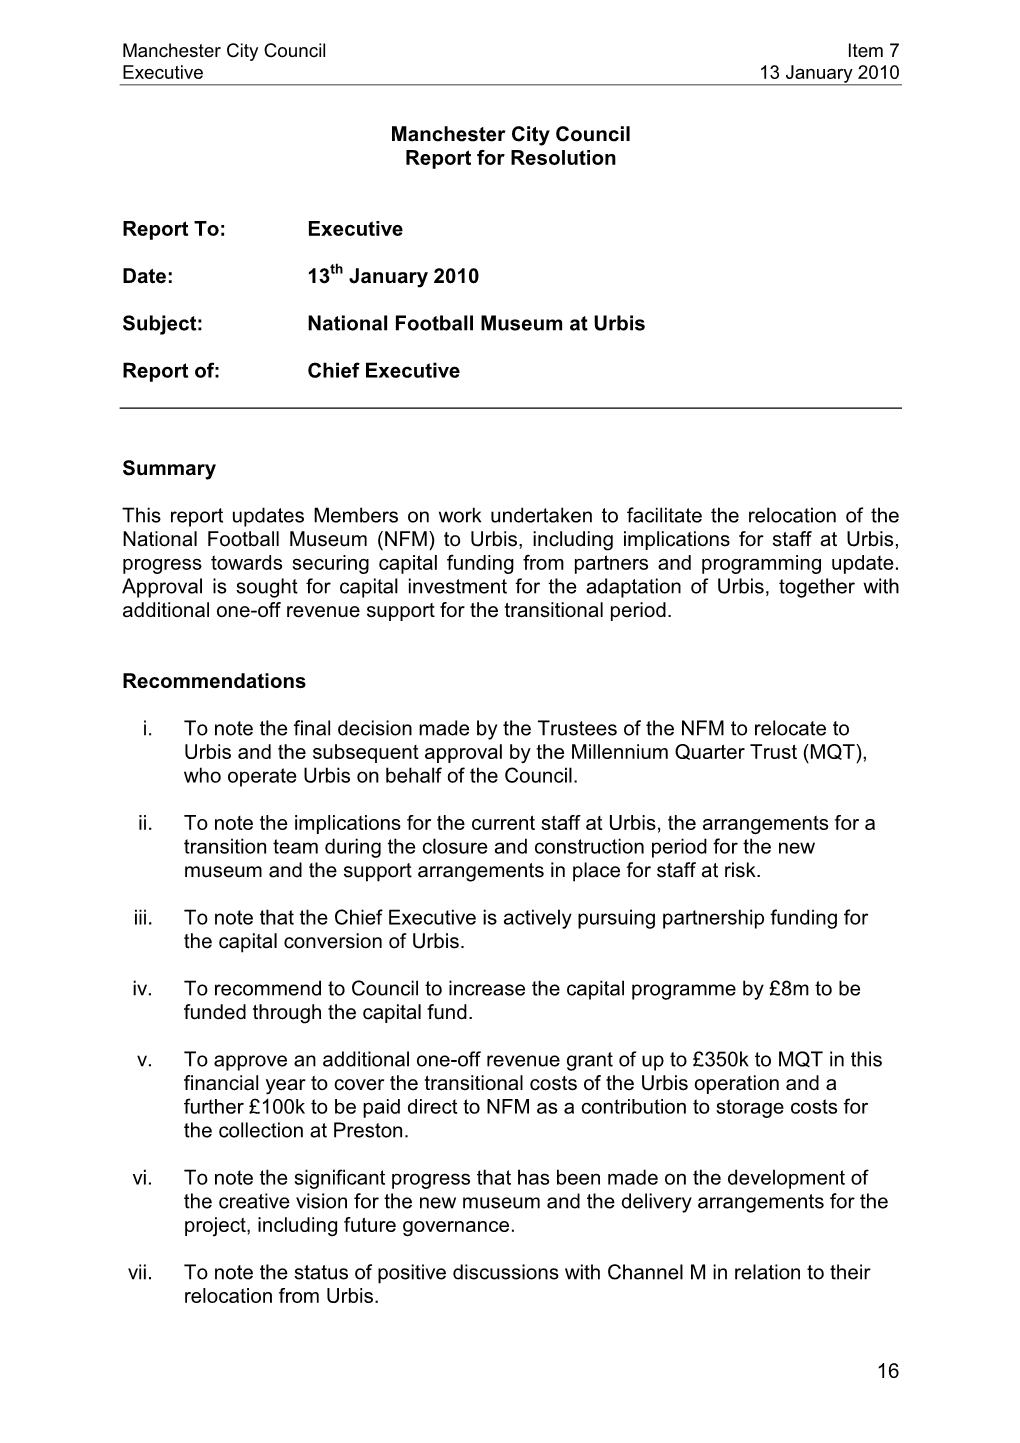 National Football Museum Report to the Executive on 13 January 2010